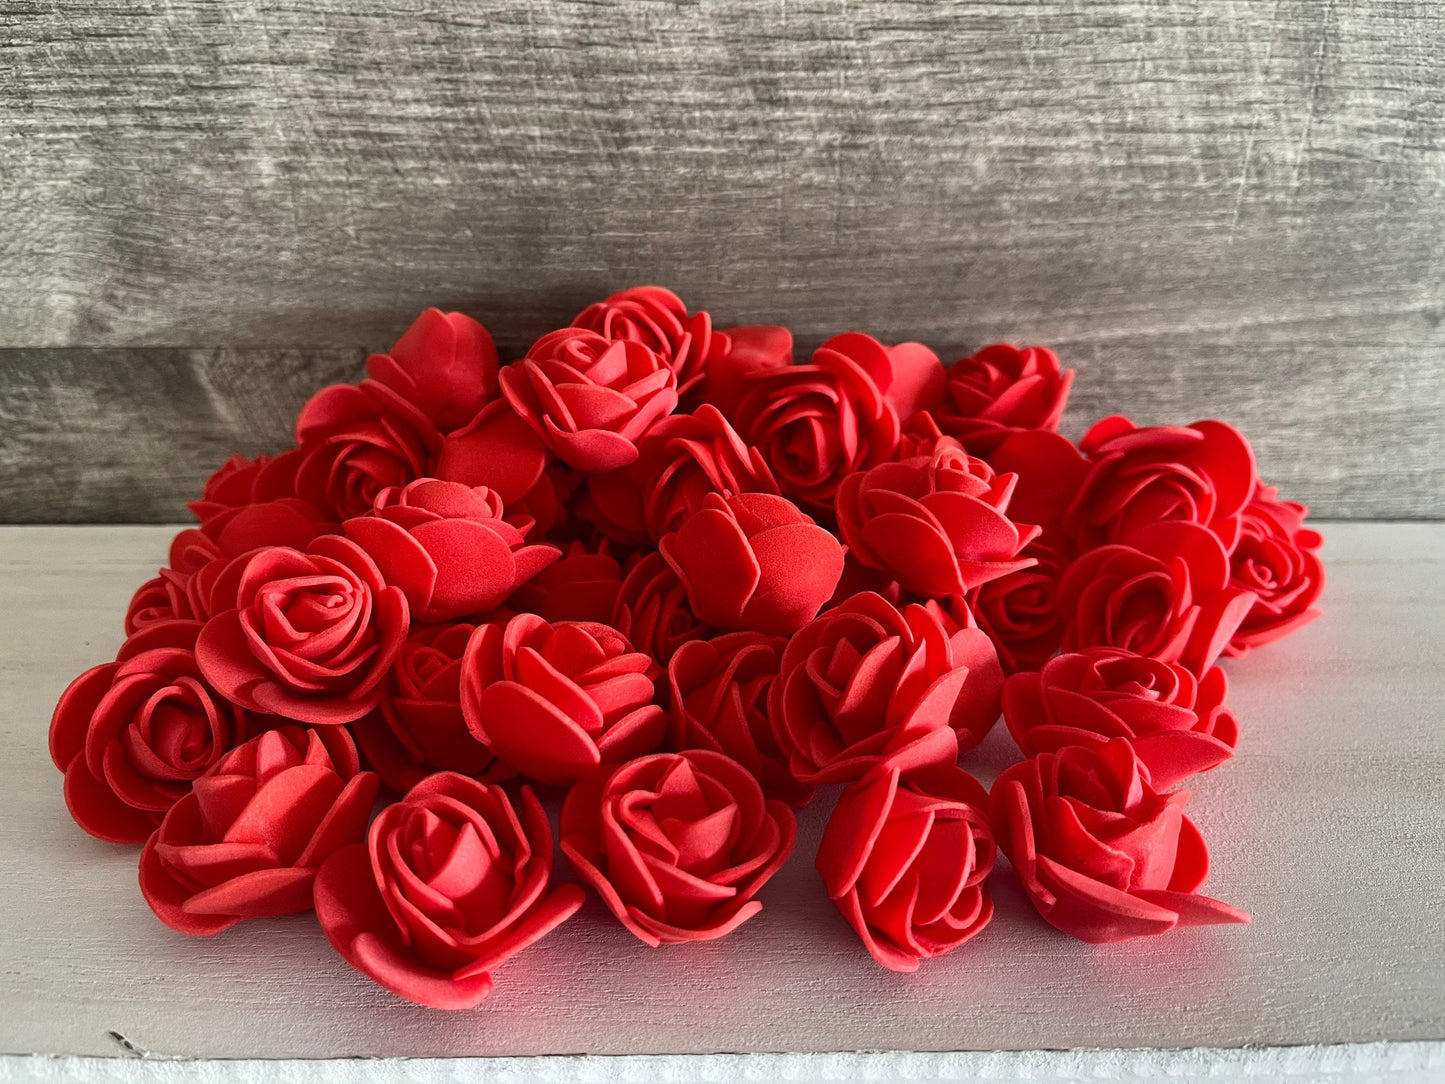 500 Pieces — 3cm Bulk Wholesale Foam Flowers for Crafts, Wedding, Shadowboxes, Gifts — Multiple Colors — Same Day Shipping